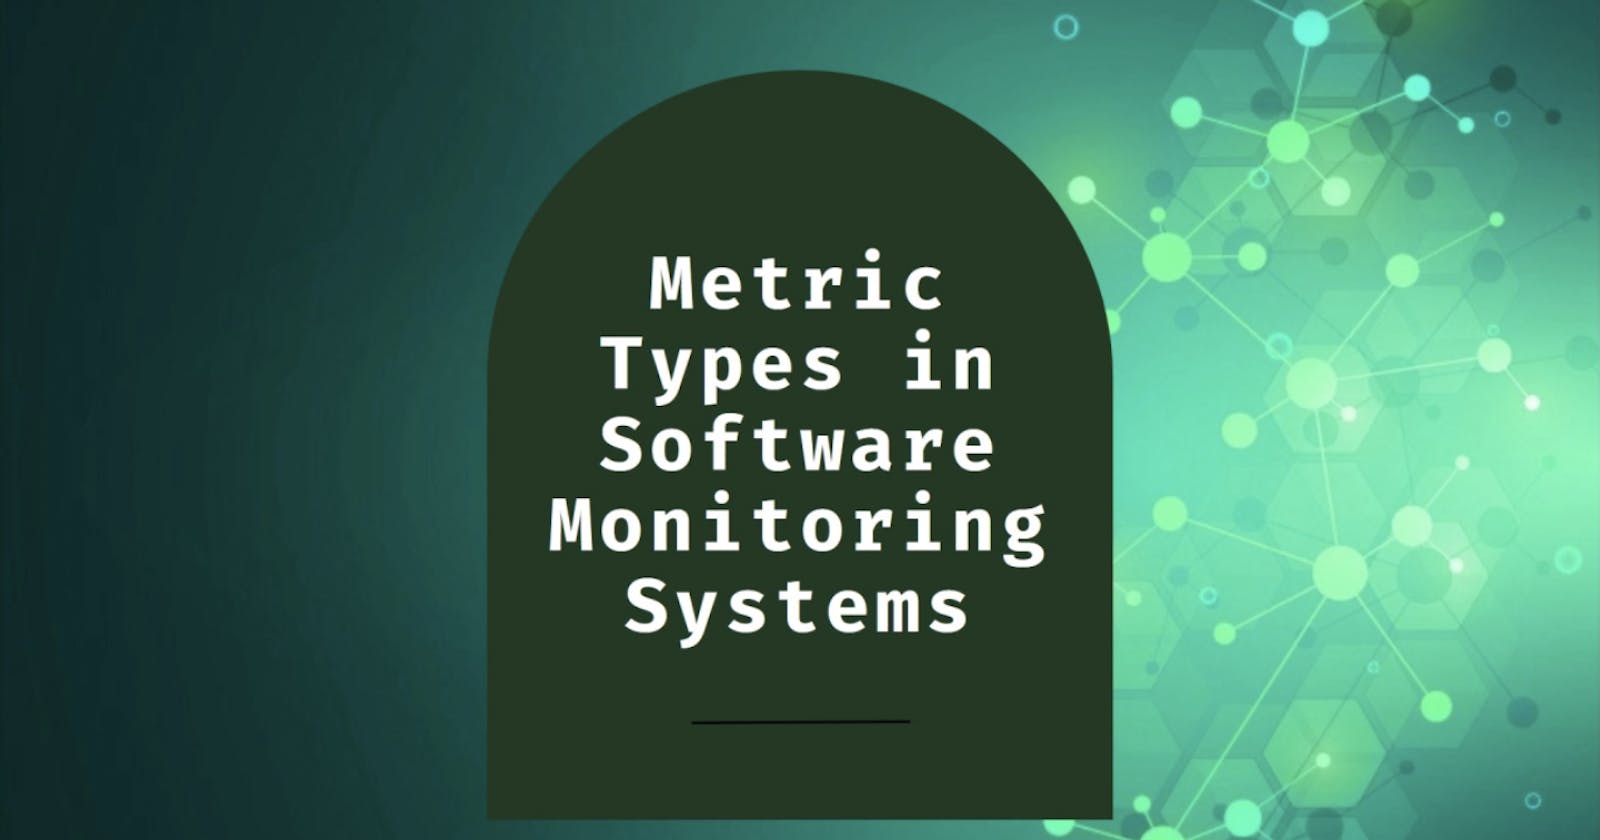 Metric Types in Software Monitoring Systems